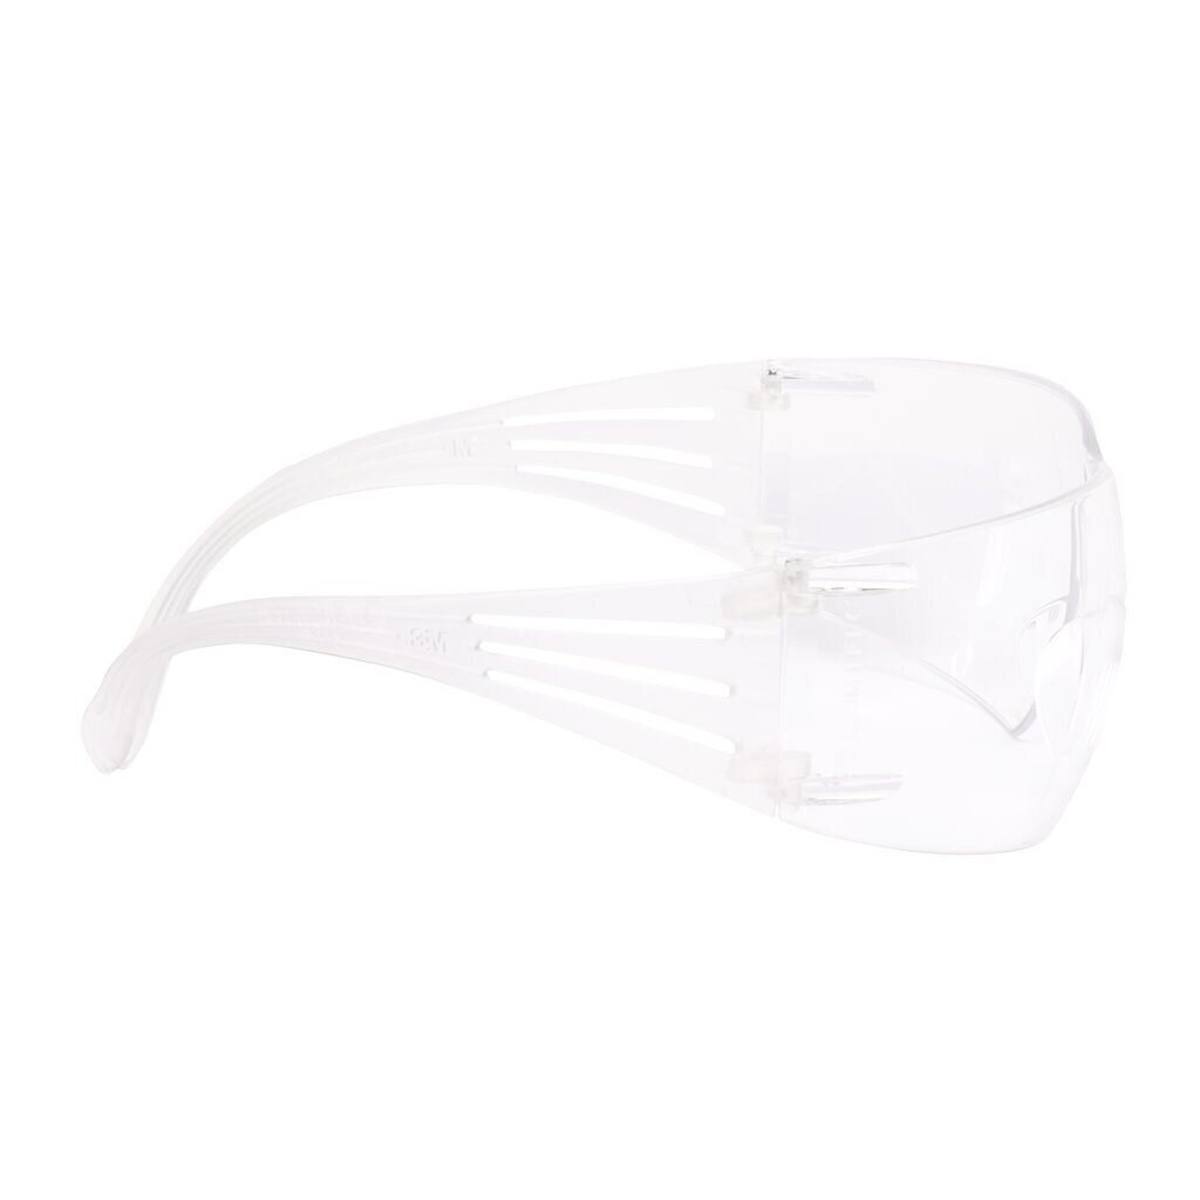 3M SecureFit 200 safety spectacles, anti-scratch/anti-fog plus coating, clear lens, SF201AFP